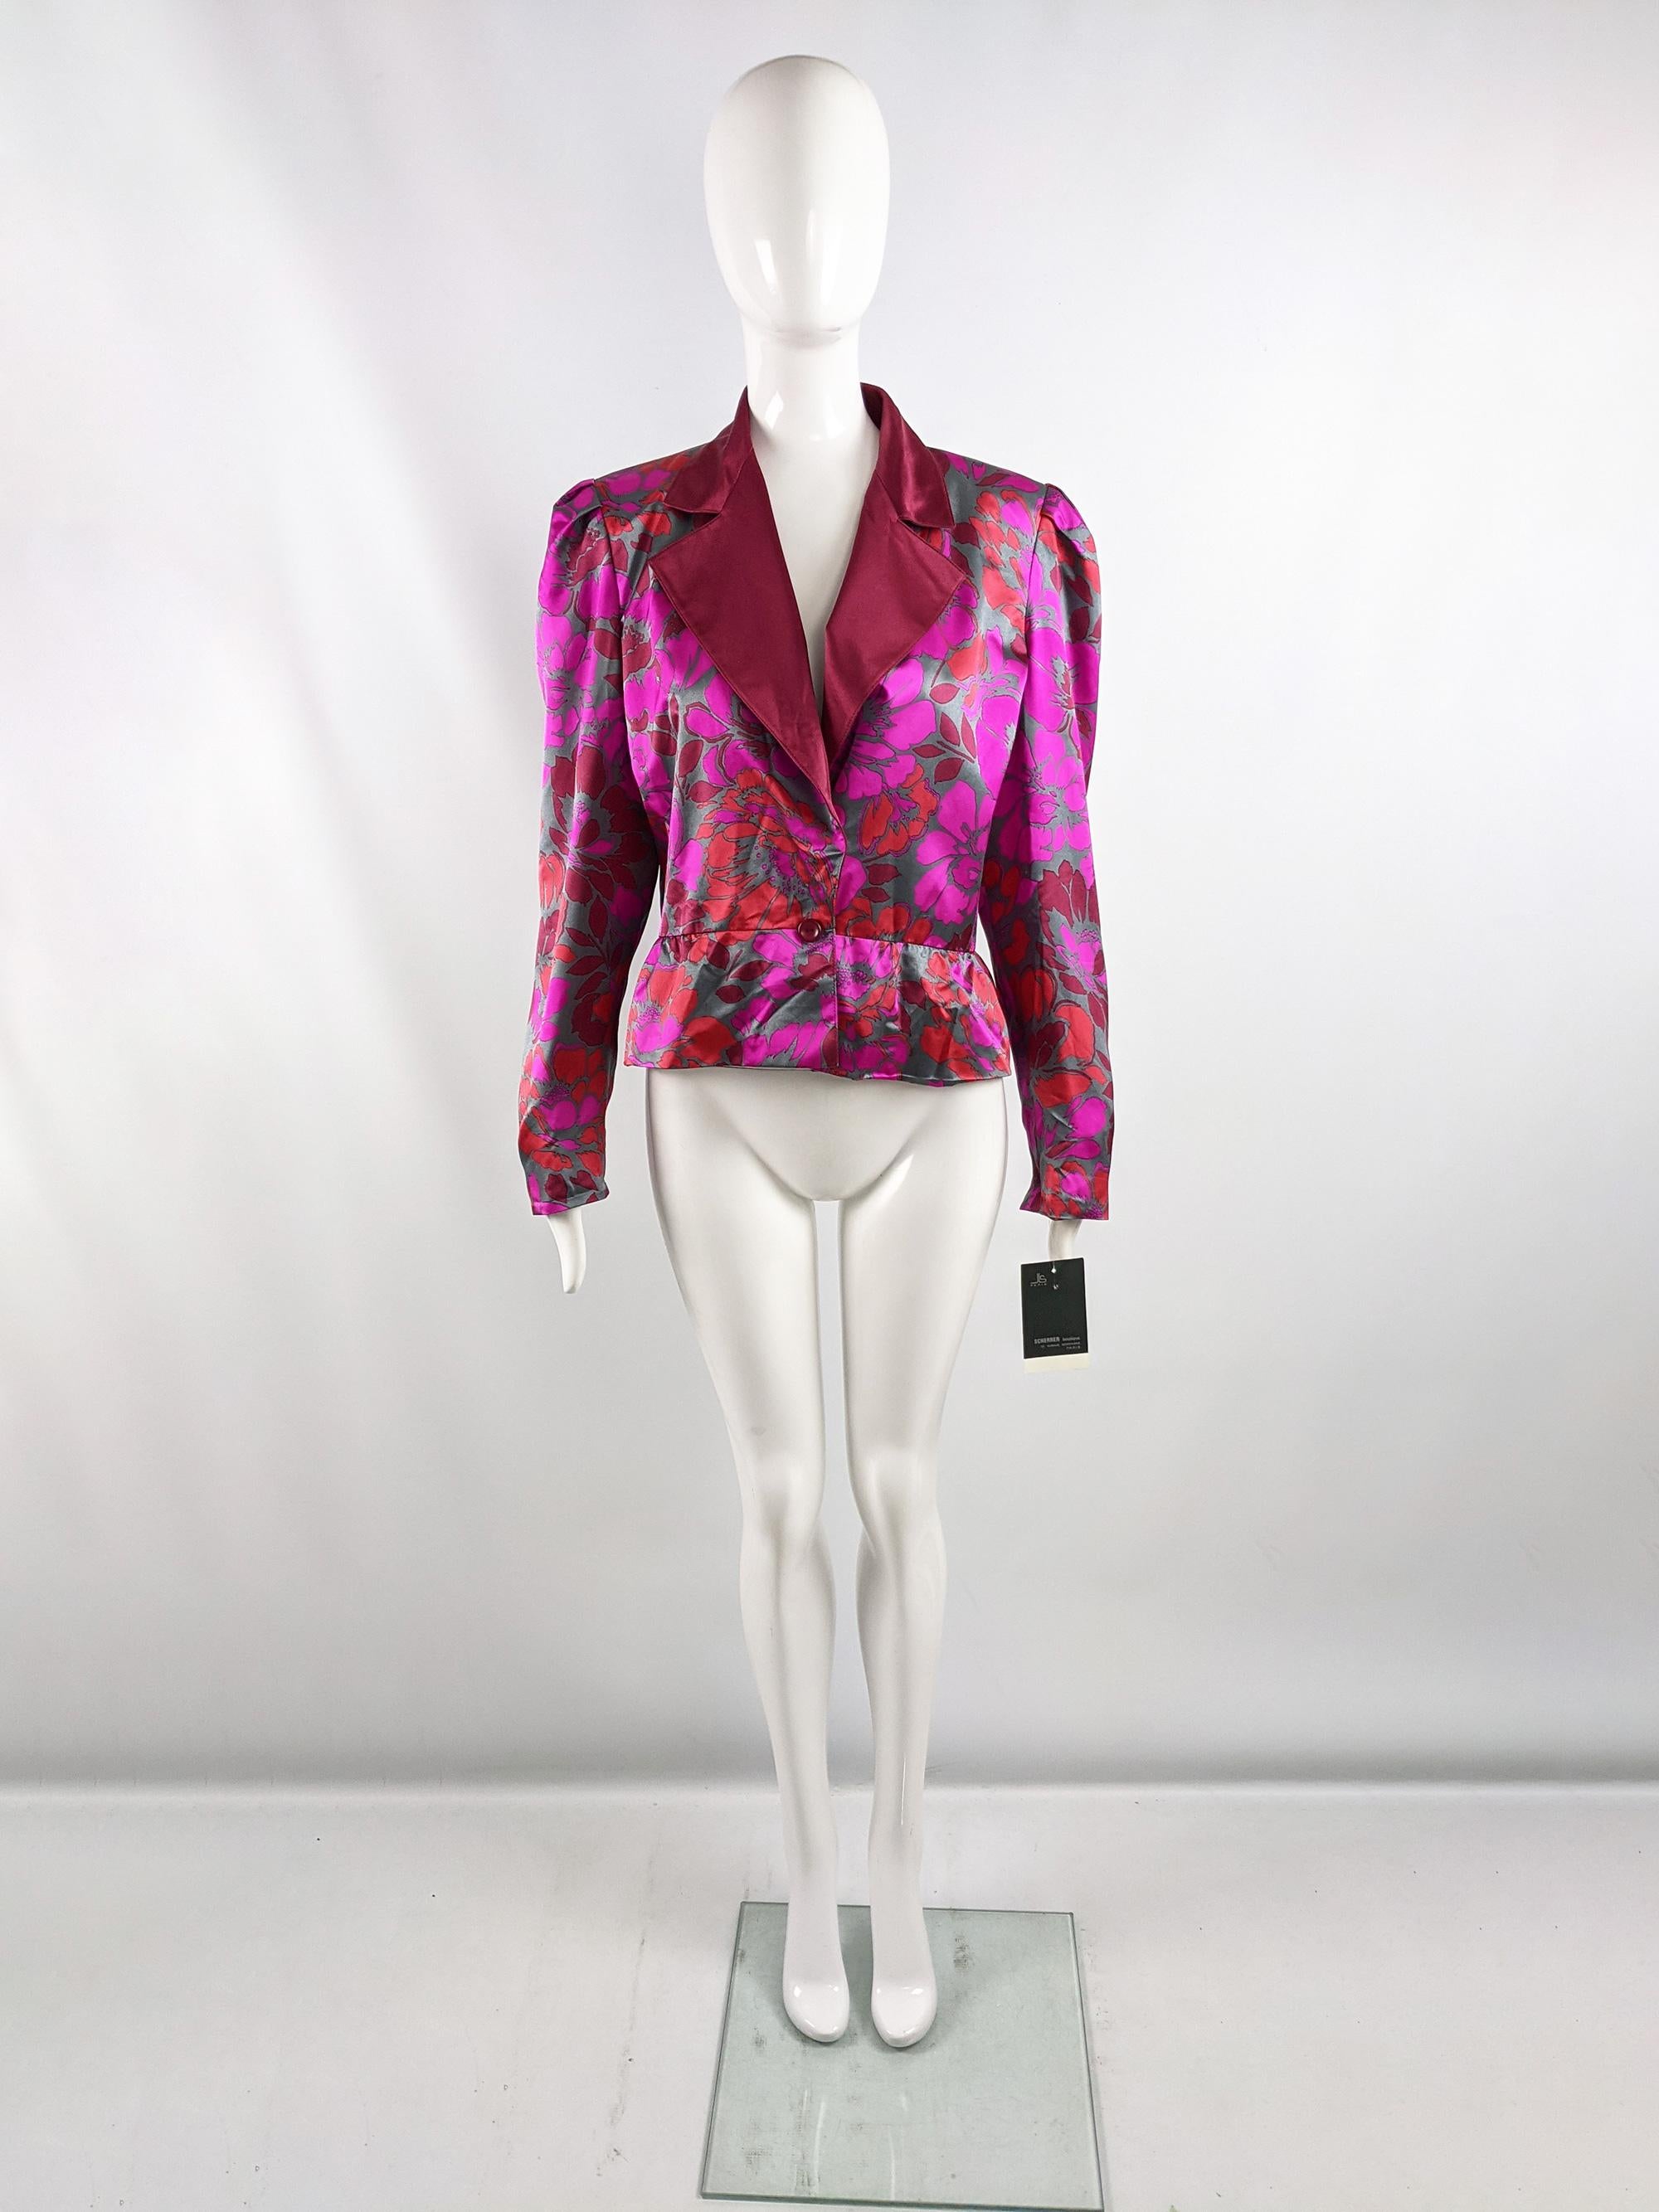 An amazing vintage womens blazer jacket from the 80s by luxury French fashion designer, Jean Louis Scherrer. Made in France, from a fuchsia, red and grey silk satin fabric with dramatic shoulder pads, a small peplum effect and wide lapels. Perfect